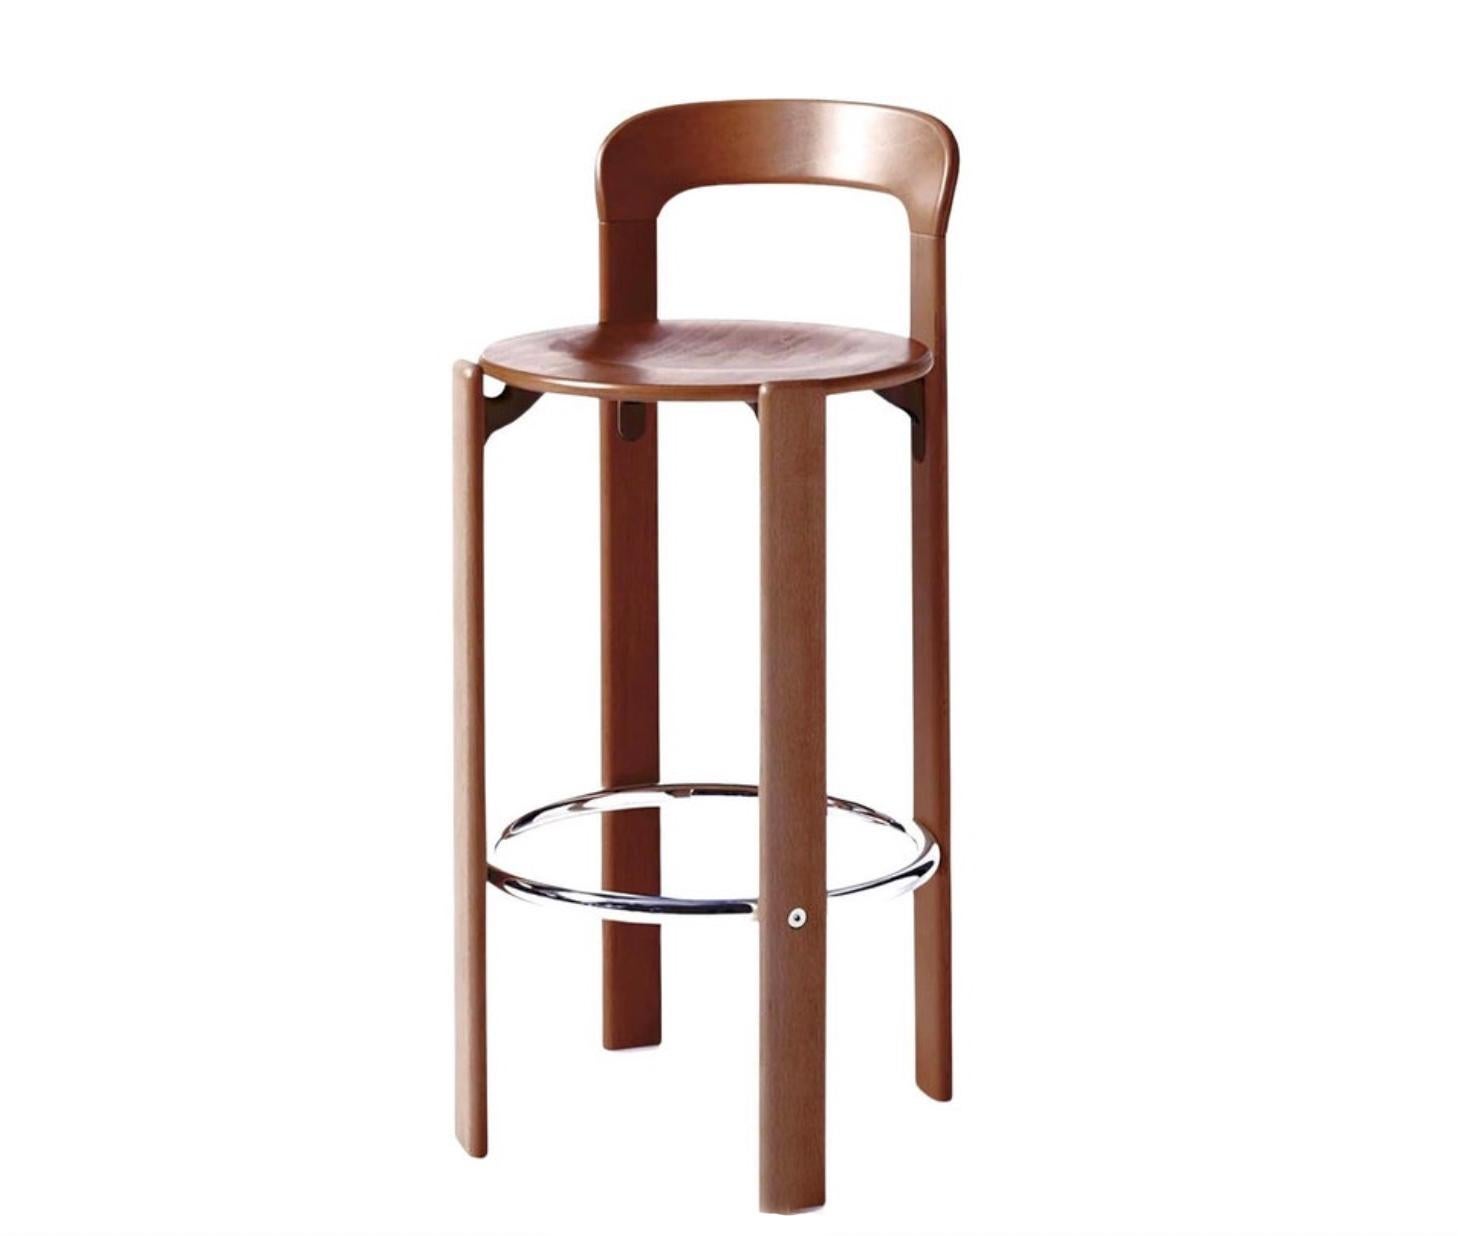 Pre Owned Modern Bruno Rey Bar Stools with Backs In Brown by Dietiker. A classic design by Bruno Rey produced by Dietiker. Made In Italy. Retail value $1000.00 each. All Stools Available In Brooklyn NYC.

(8) Stools Available

Price is Per